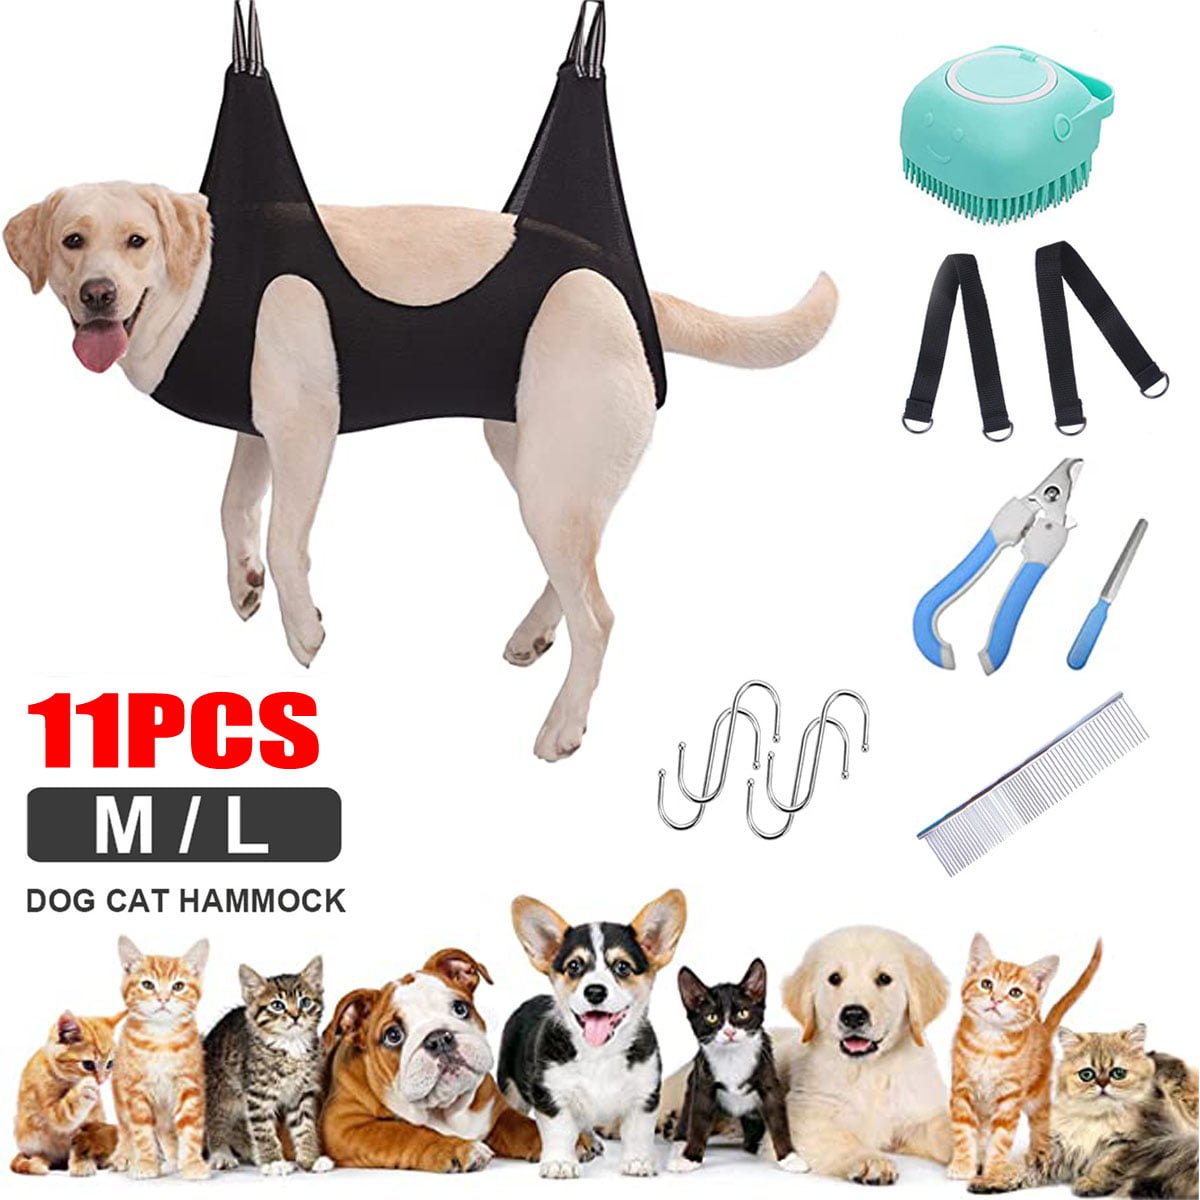 11Pieces Pet Grooming Hammock Harness Care Supplies Black, Dog Hammock  Holder Bag With Nail Clippers, Nail File, Pet Comb 